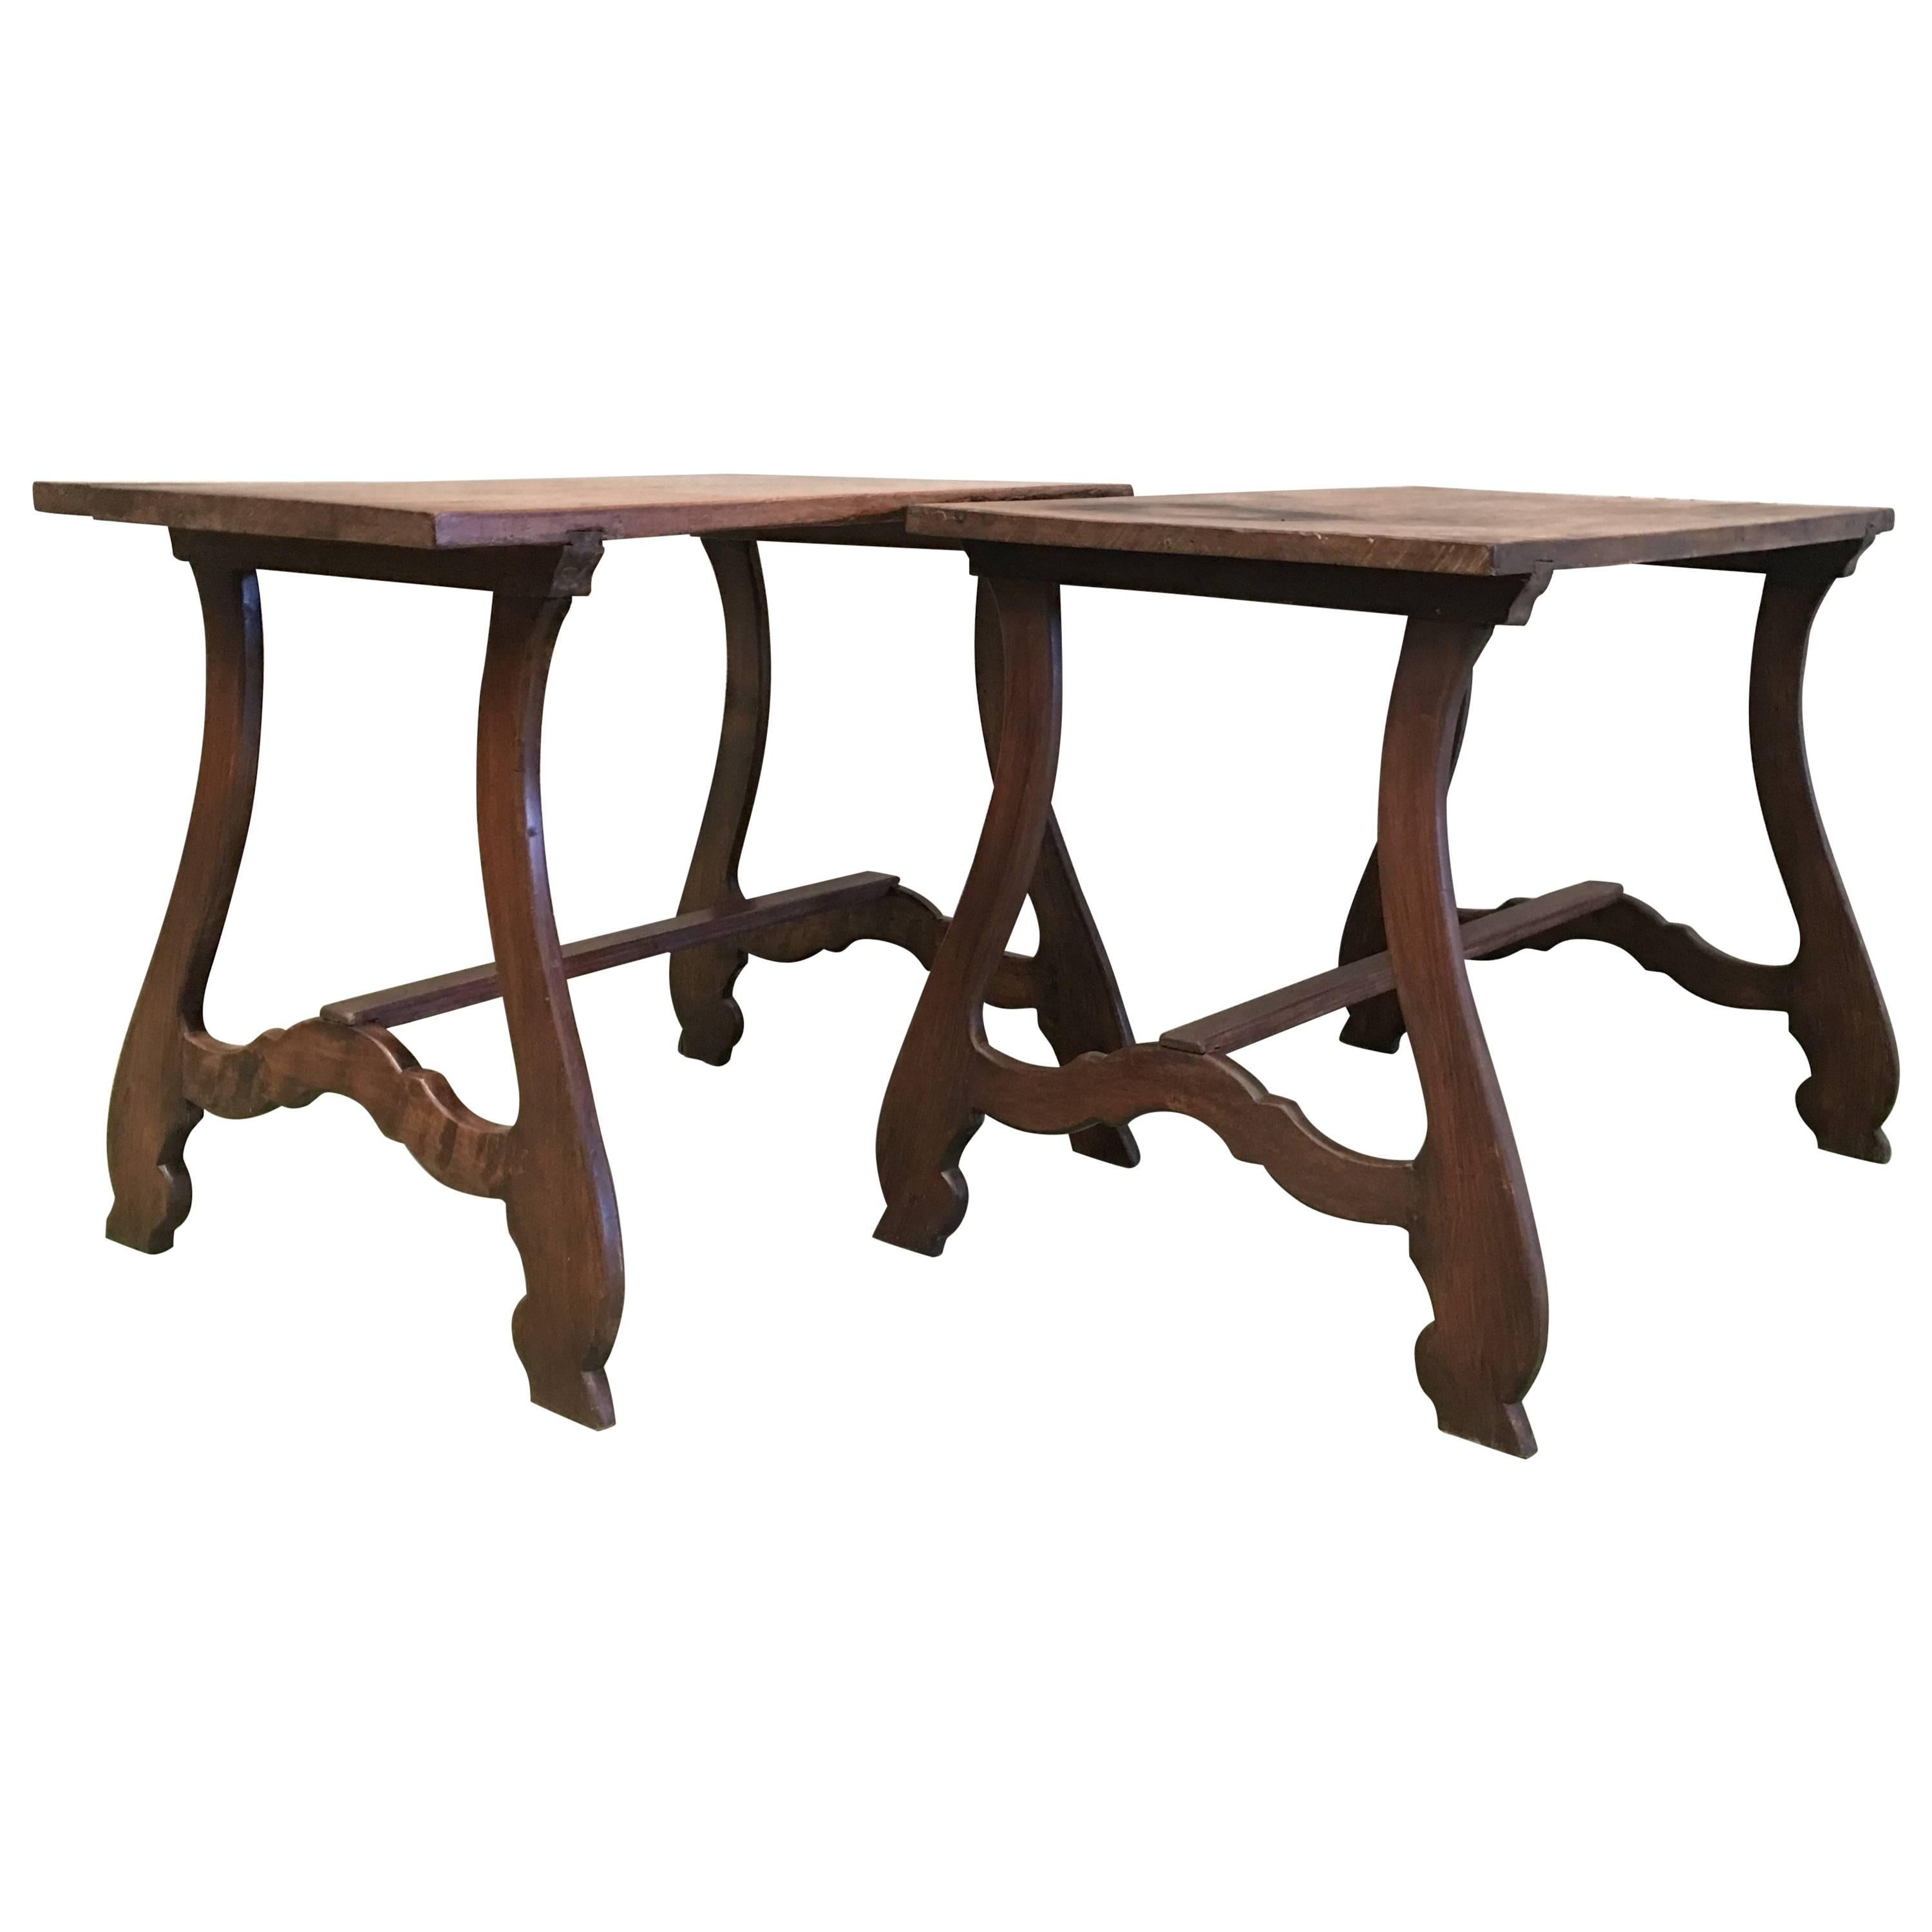 Pair of 20th Spanish farm tables or desk table. Side tables.

Measurements:
Table 1 : 37.20in x 21in height 29.52in
Table 2 : 38.38in x 23.62in height 28.74in.